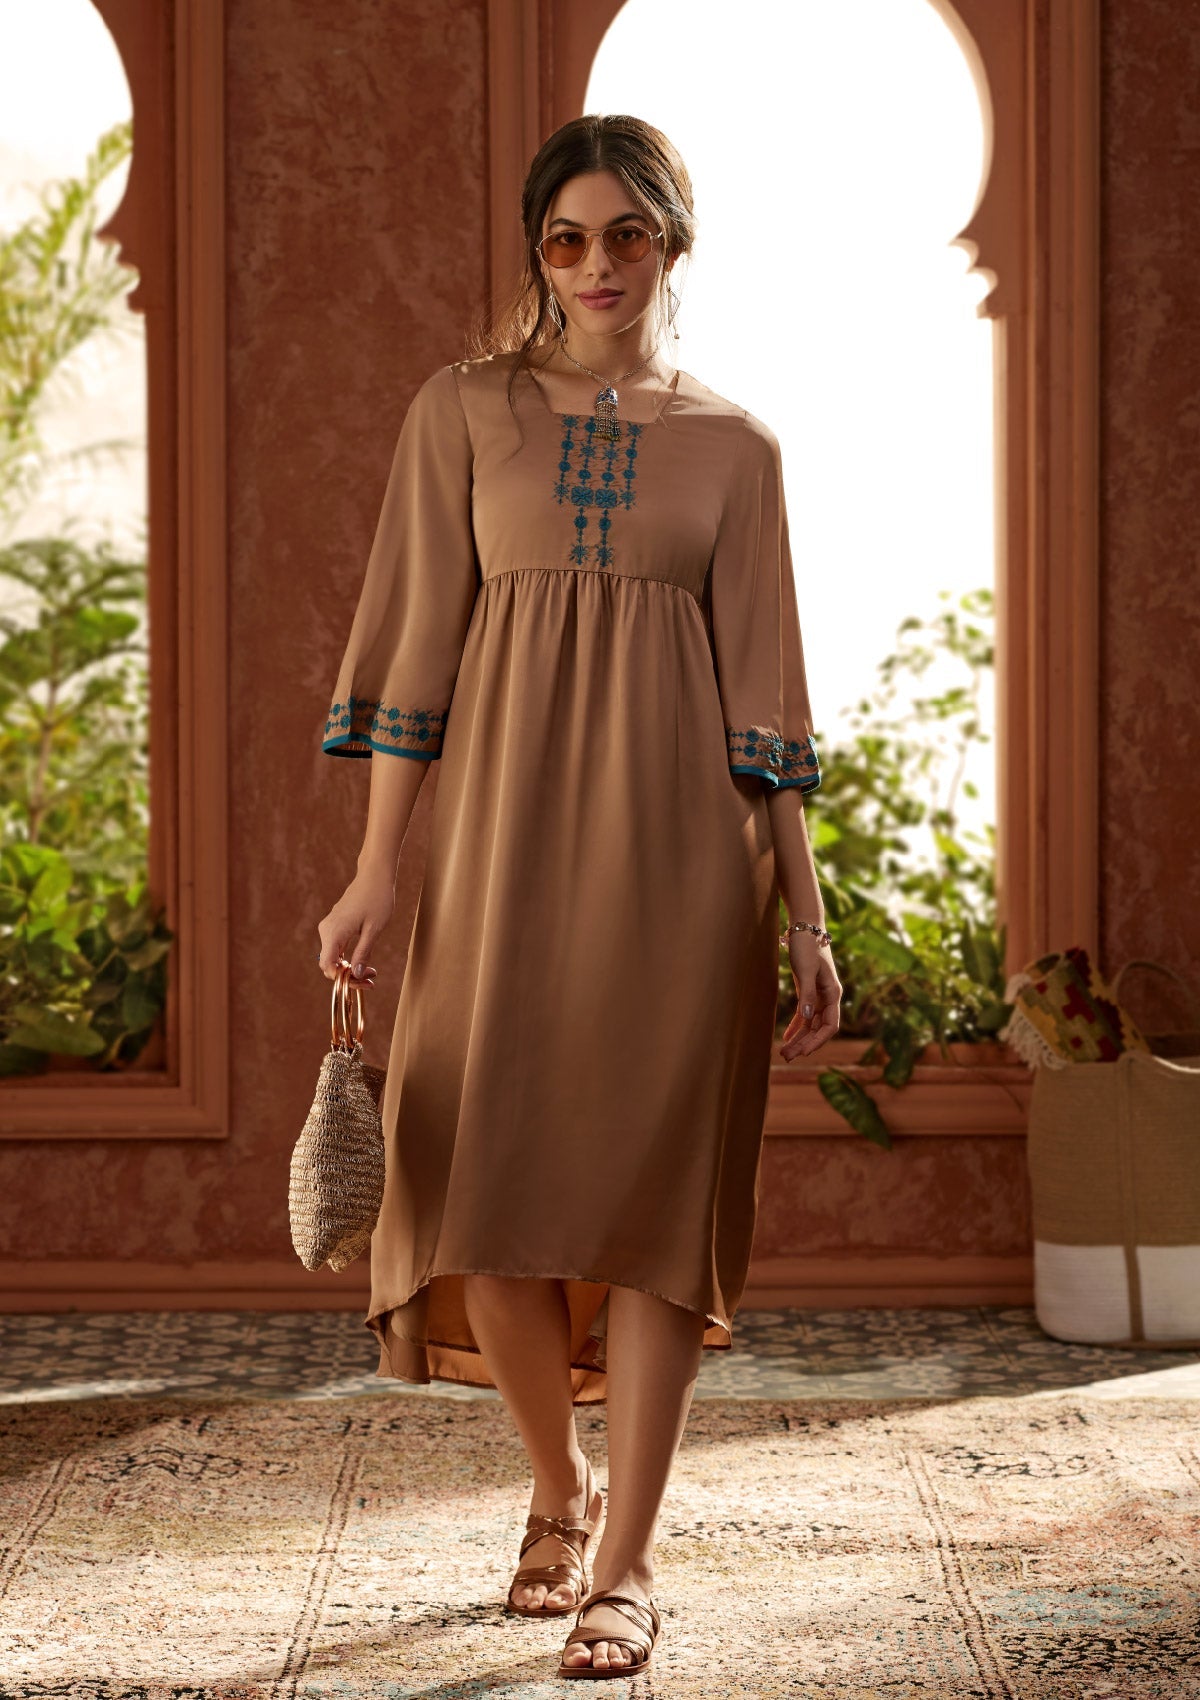 Moroccan Embroidered Free Spirit Look - IshqMe